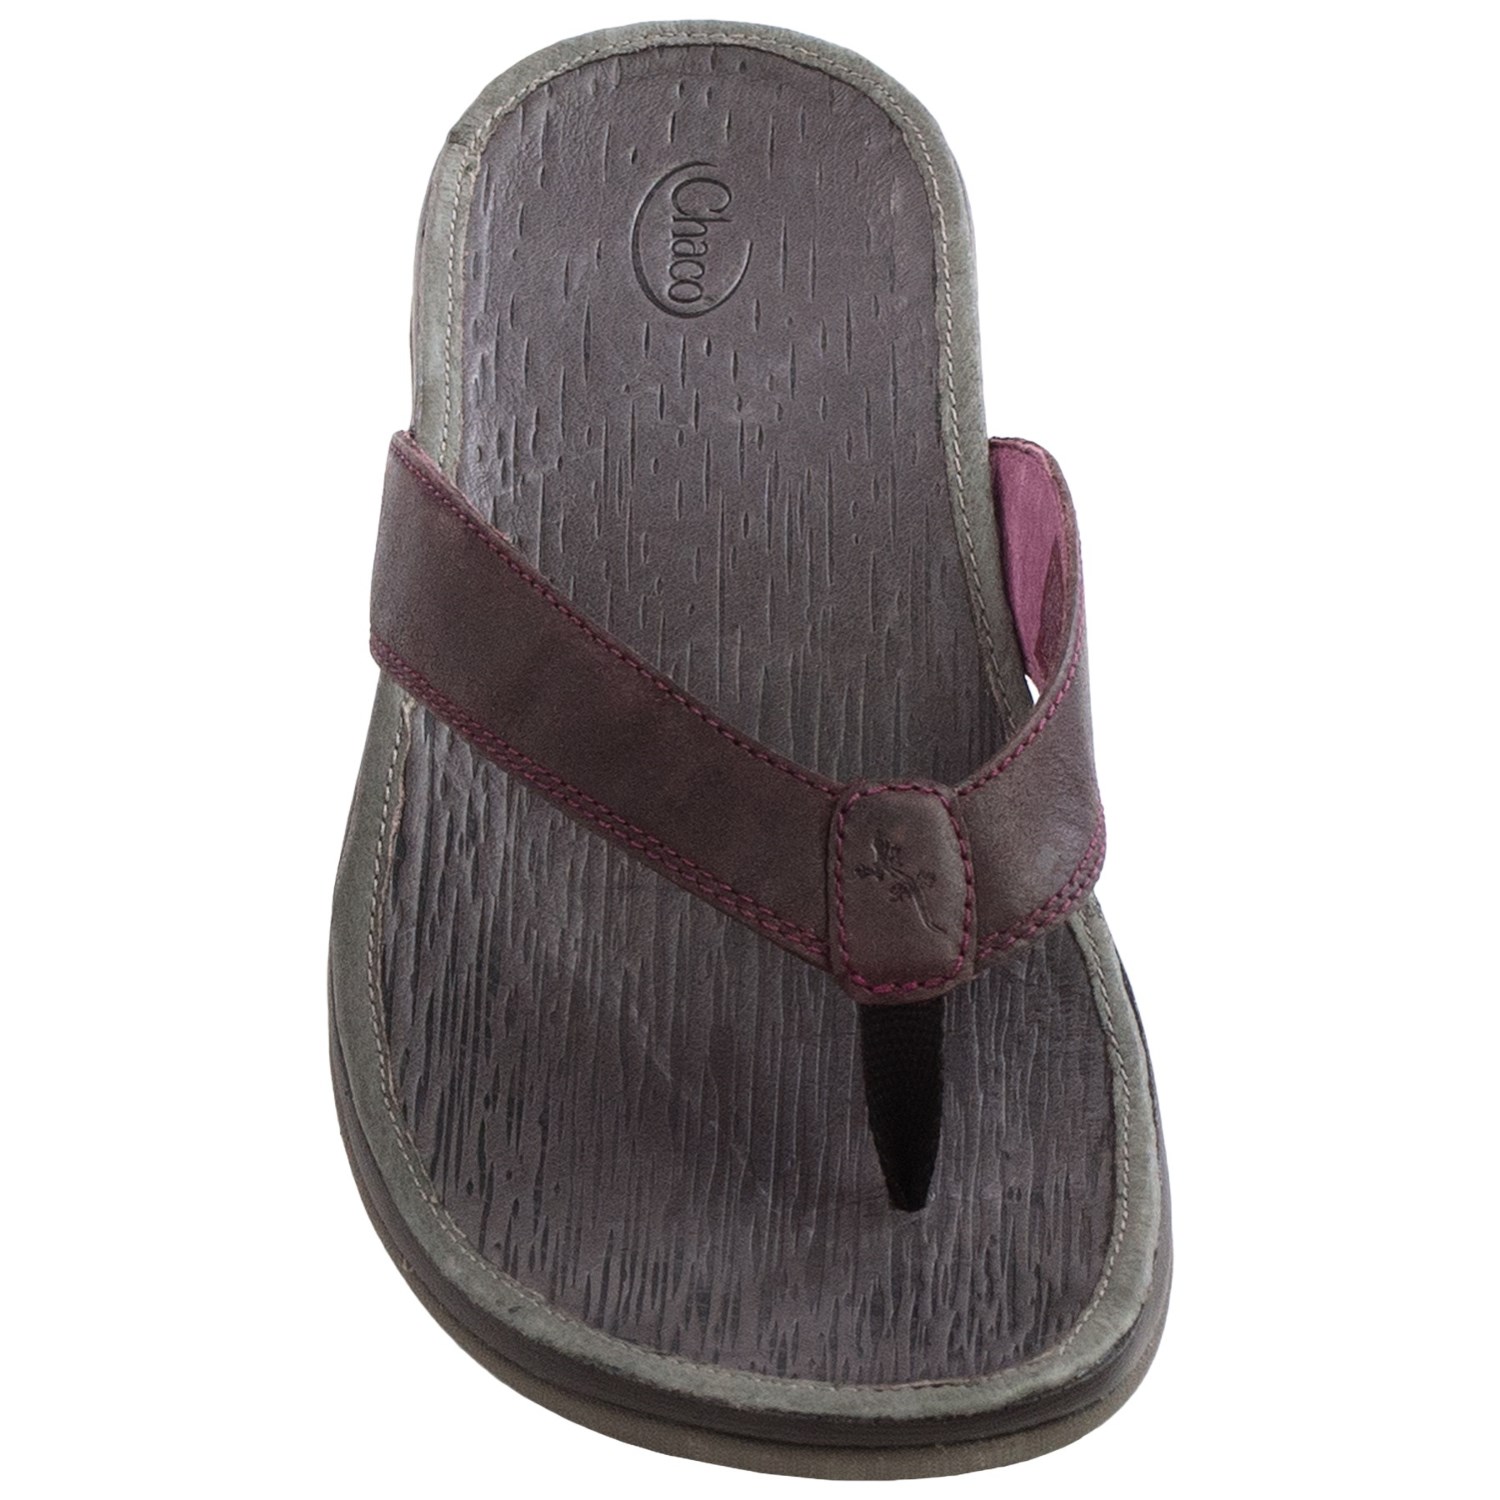 Chaco Sol Flip-Flops - Leather (For Women)